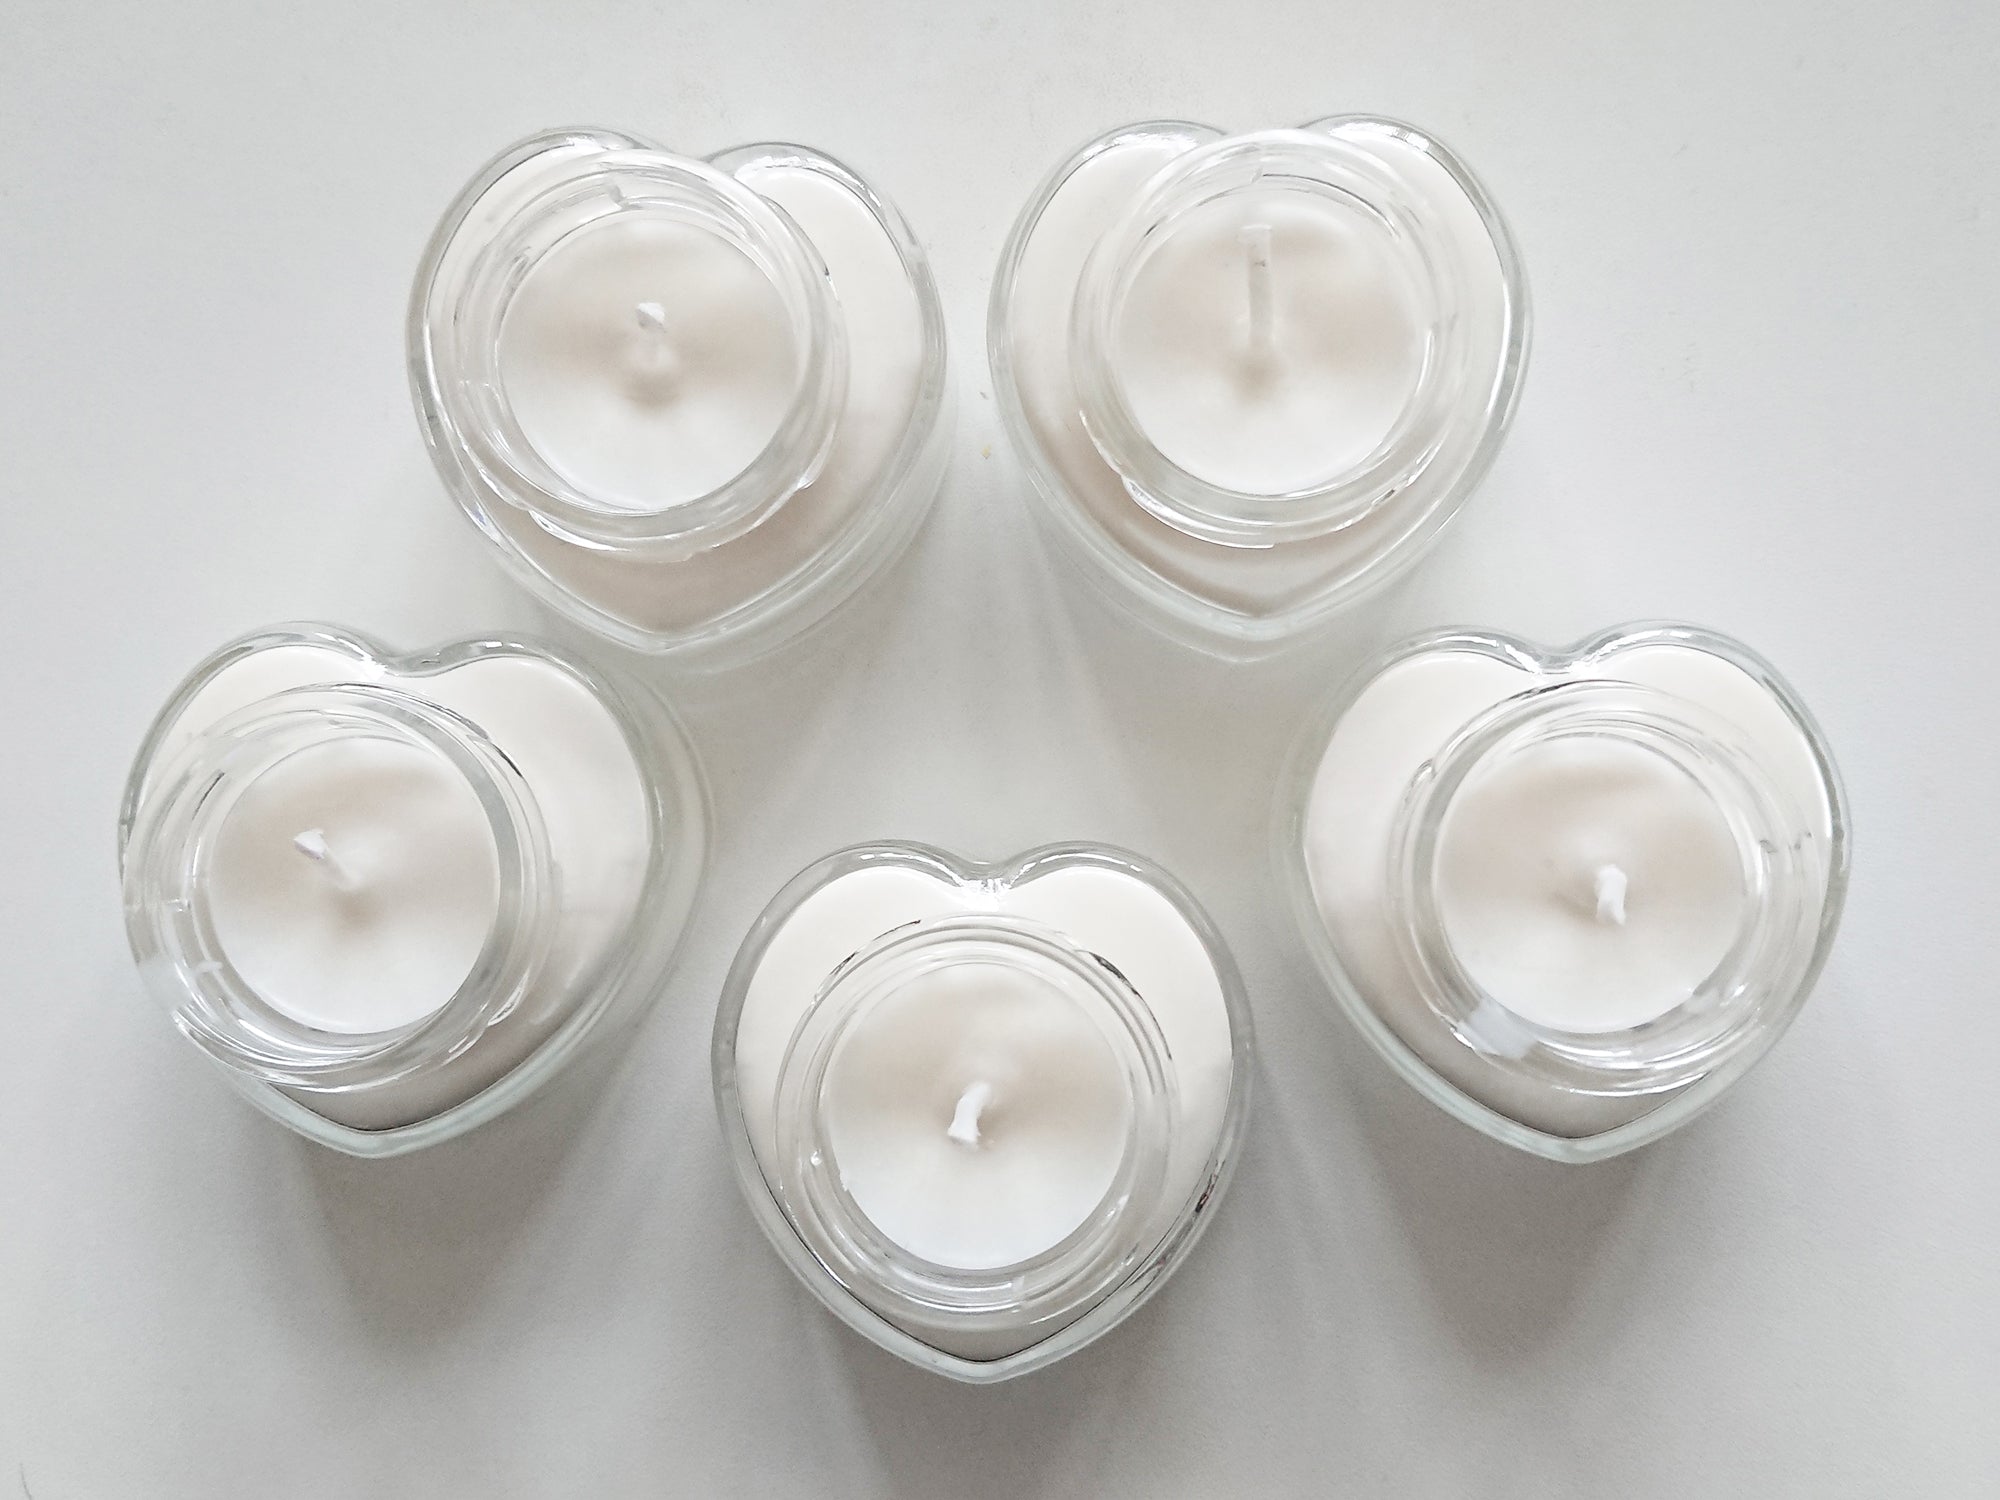 Set of 5 small heart-shaped candles, unscented